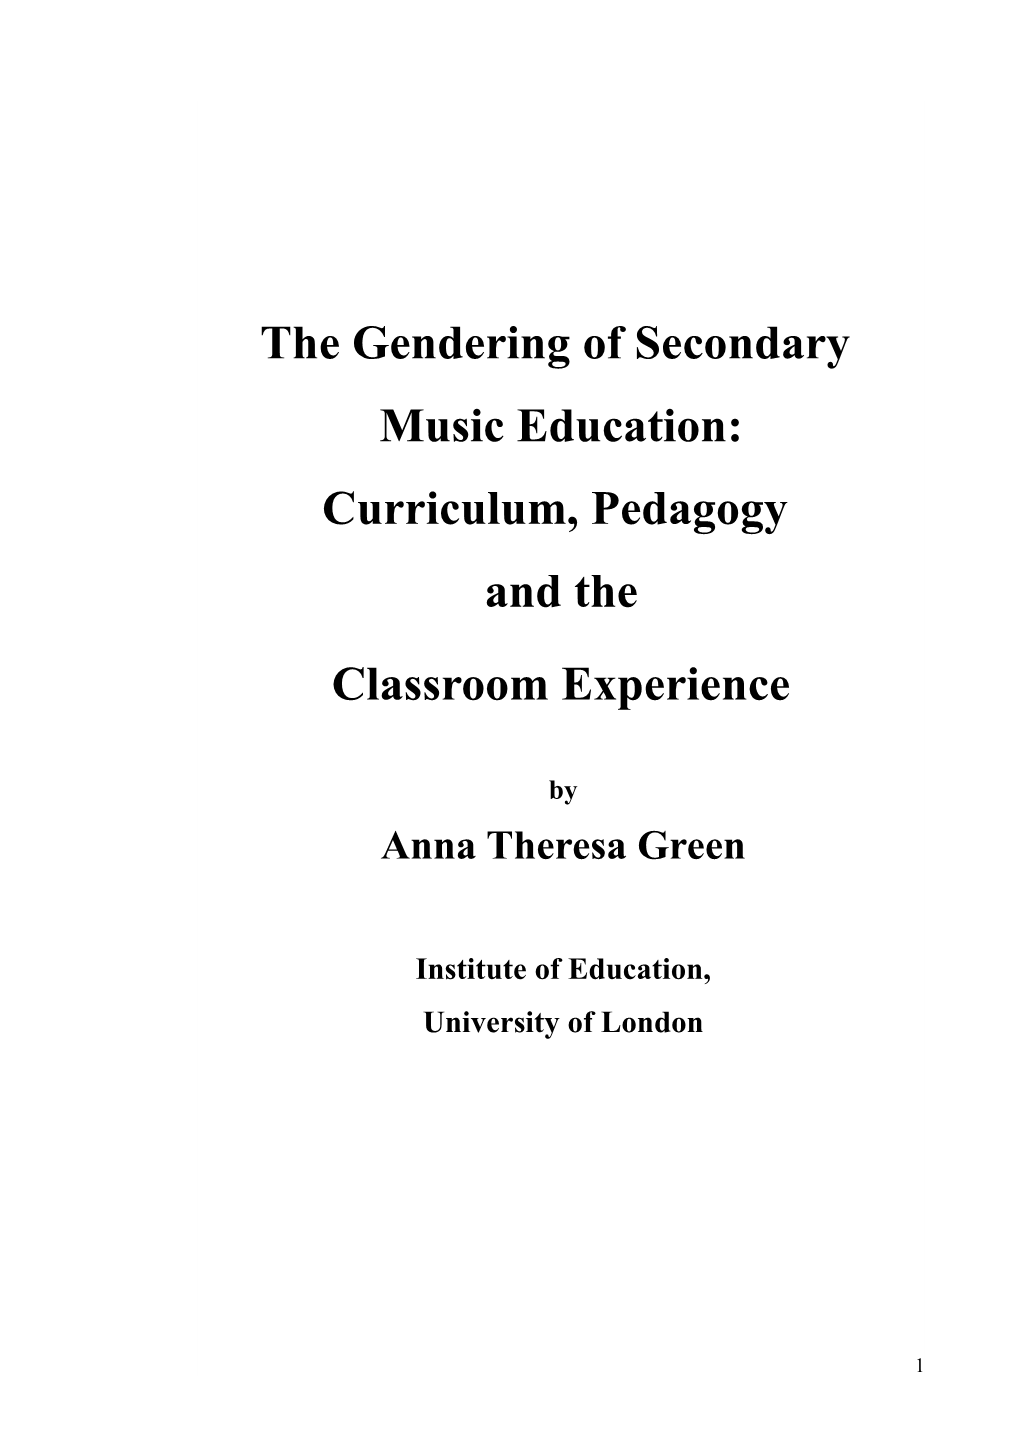 Anna Green PHD, for Submission